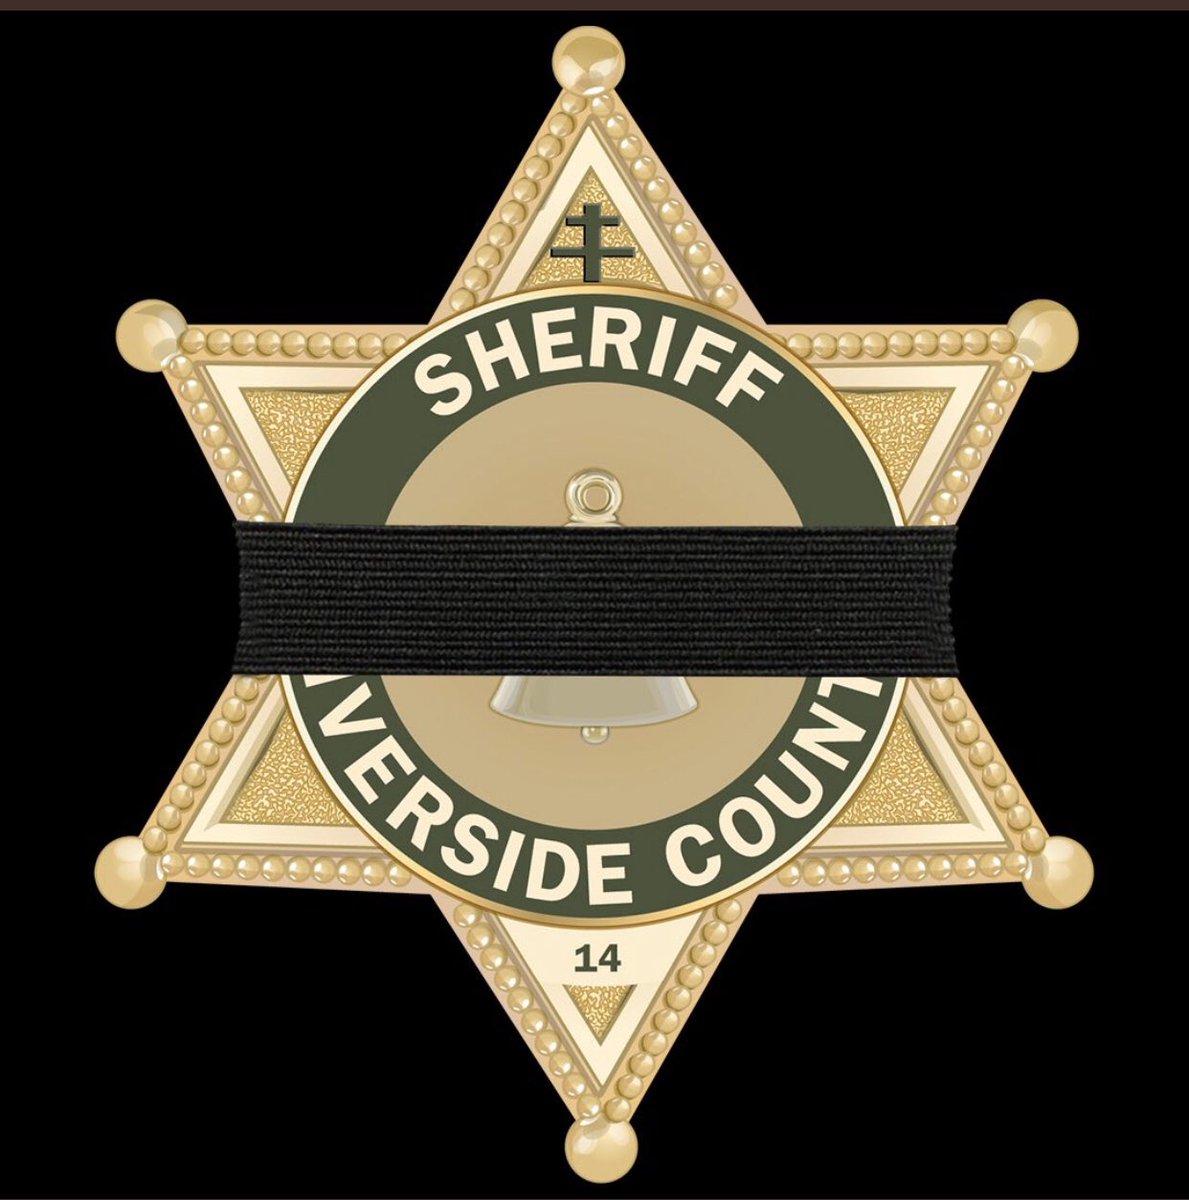 We are saddened by the news that RSO Deputy Terrell Young passed away from complications from the COVID-19 virus. Our thoughts and prayers go out to his loved ones and department members during this difficult time. #RSO